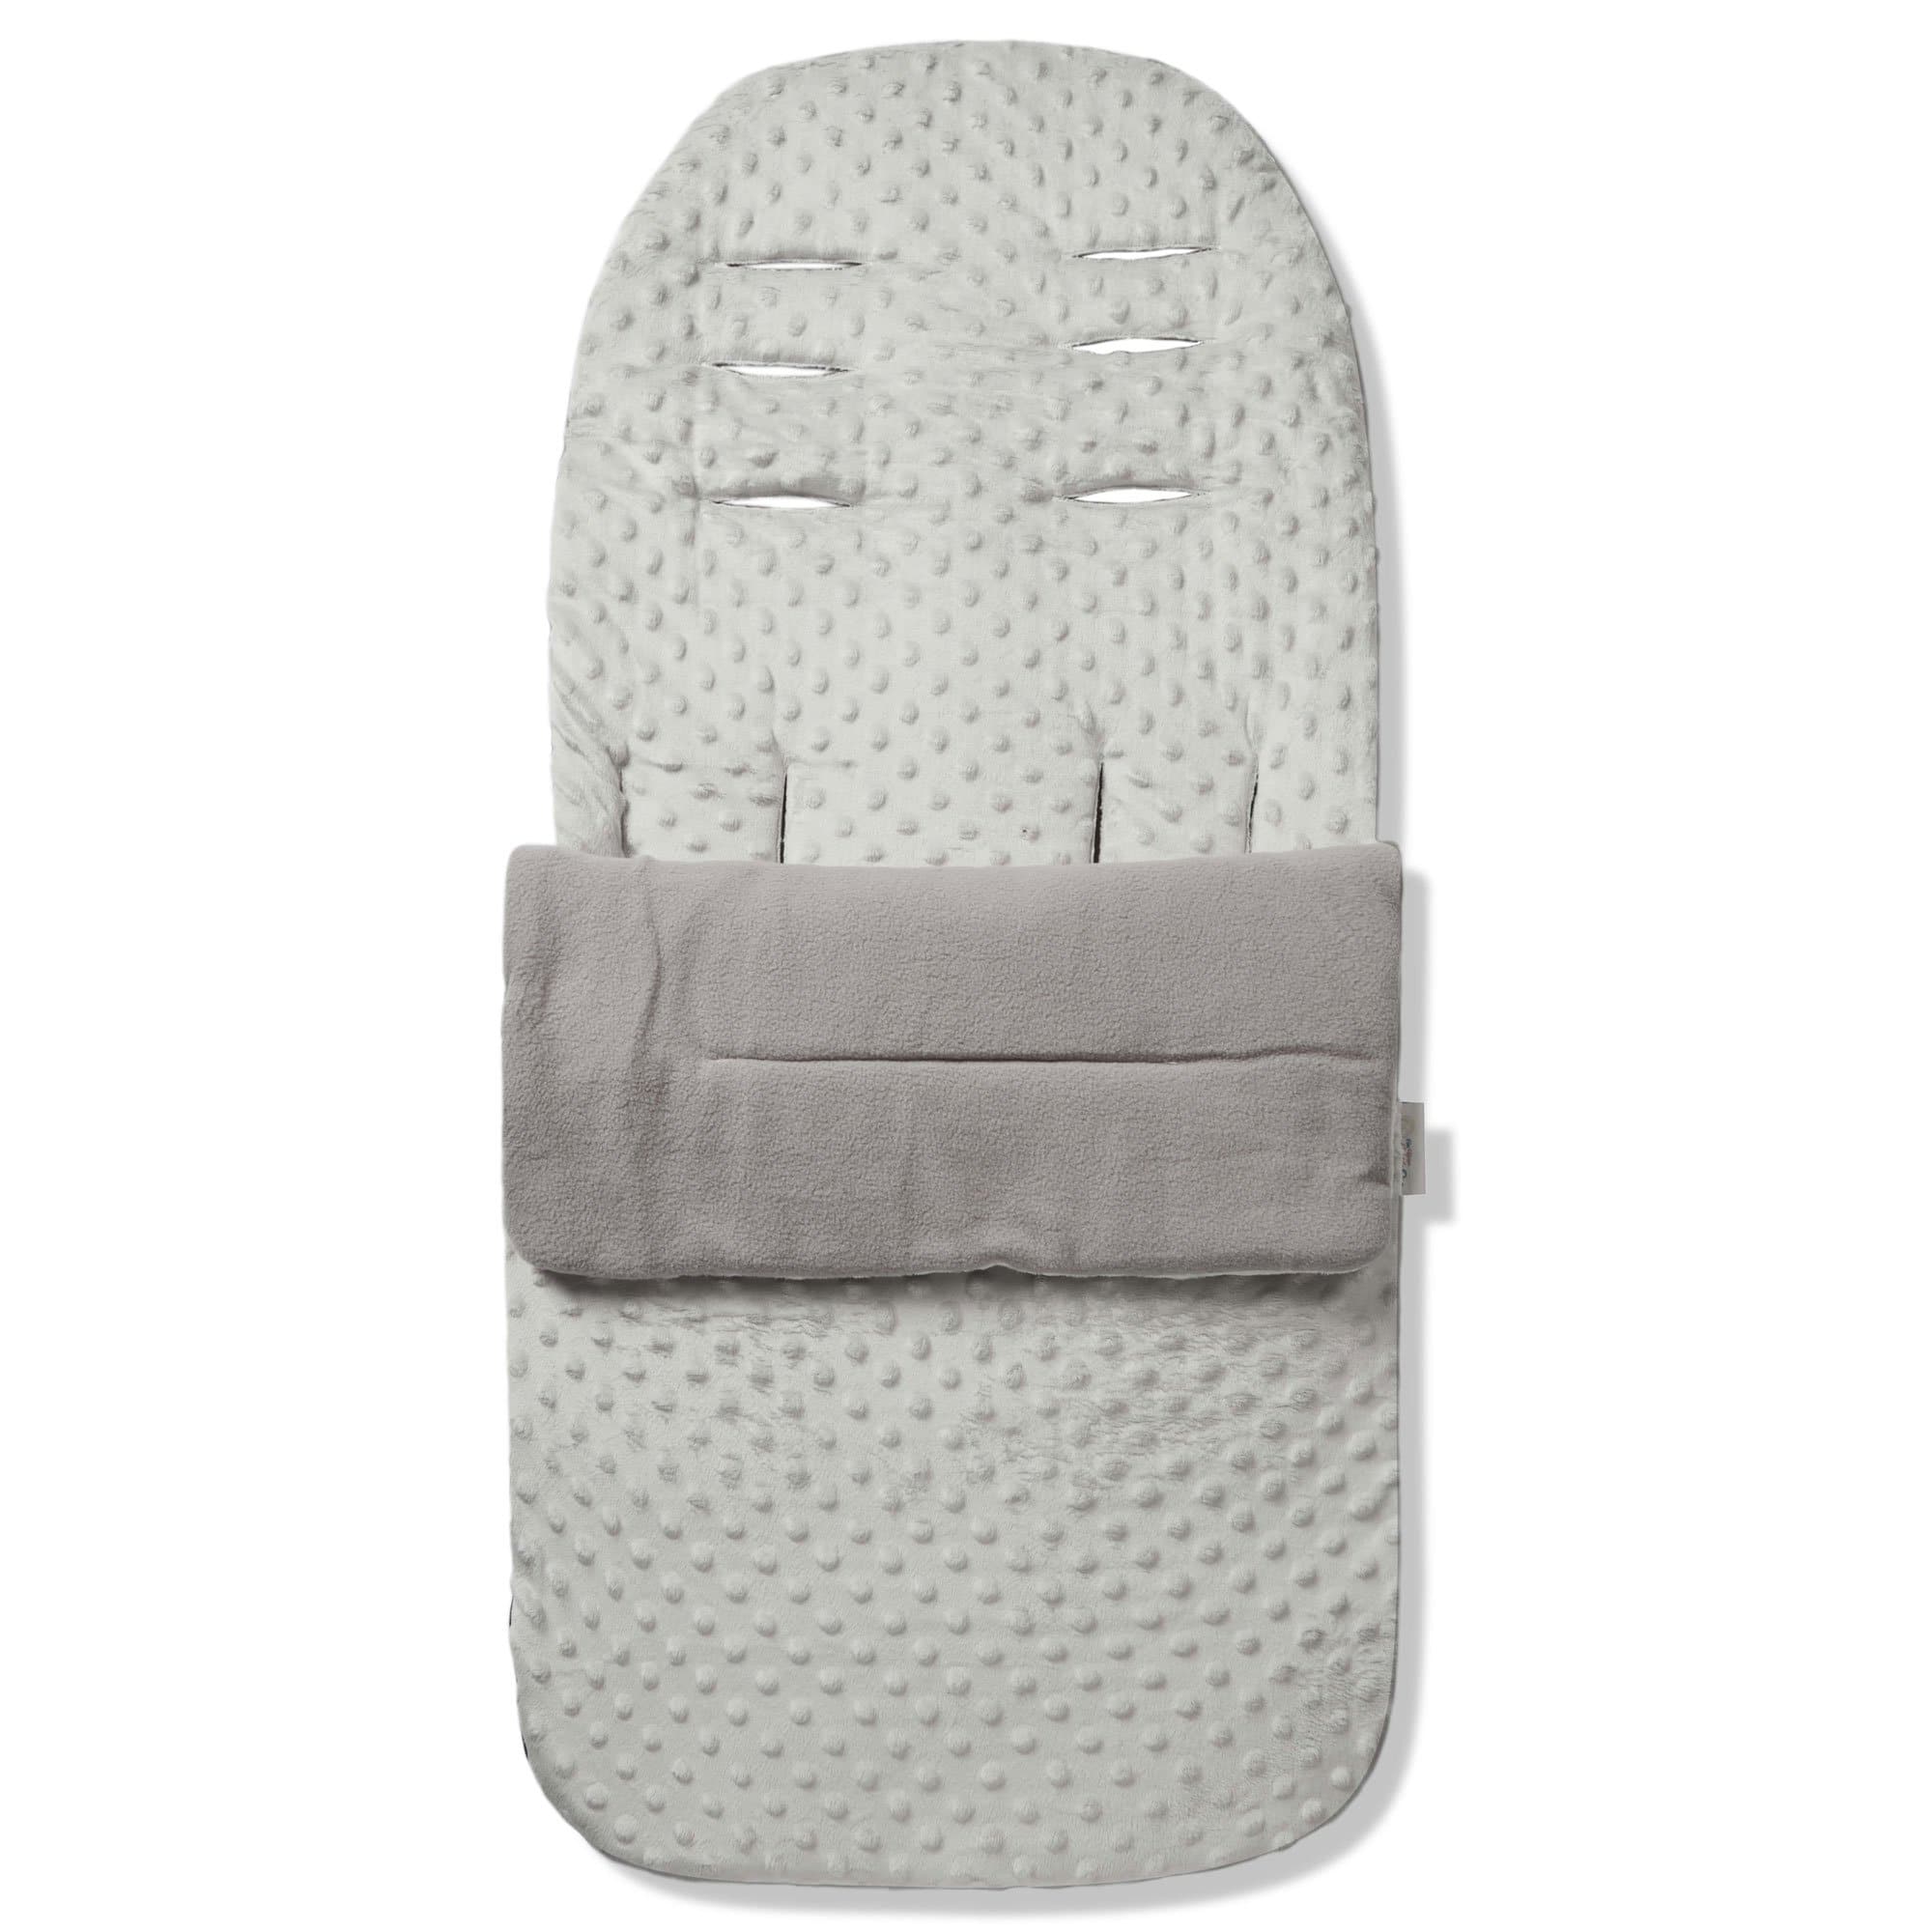 Dimple Footmuff / Cosy Toes Compatible with Maxi Cosi - Grey / Fits All Models | For Your Little One